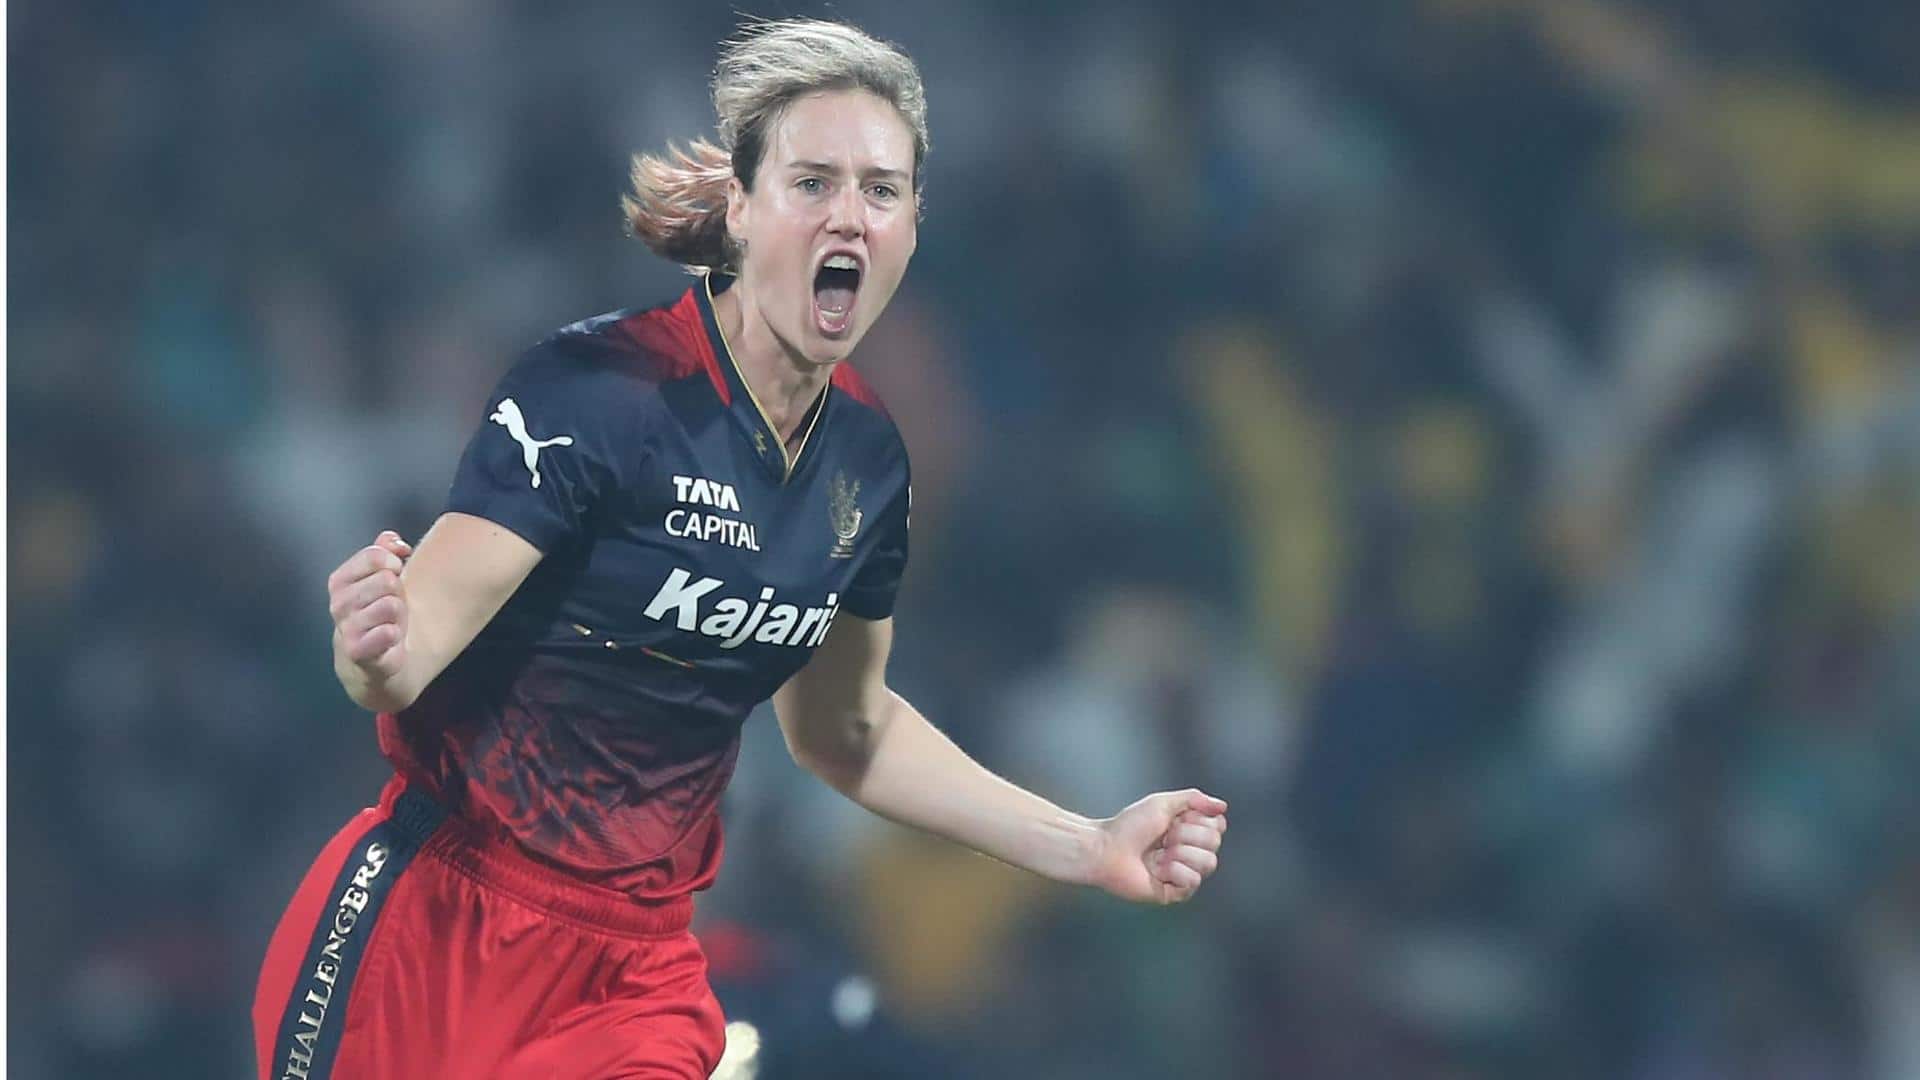 RCB's Ellyse Perry records her first WPL wicket, takes three-fer